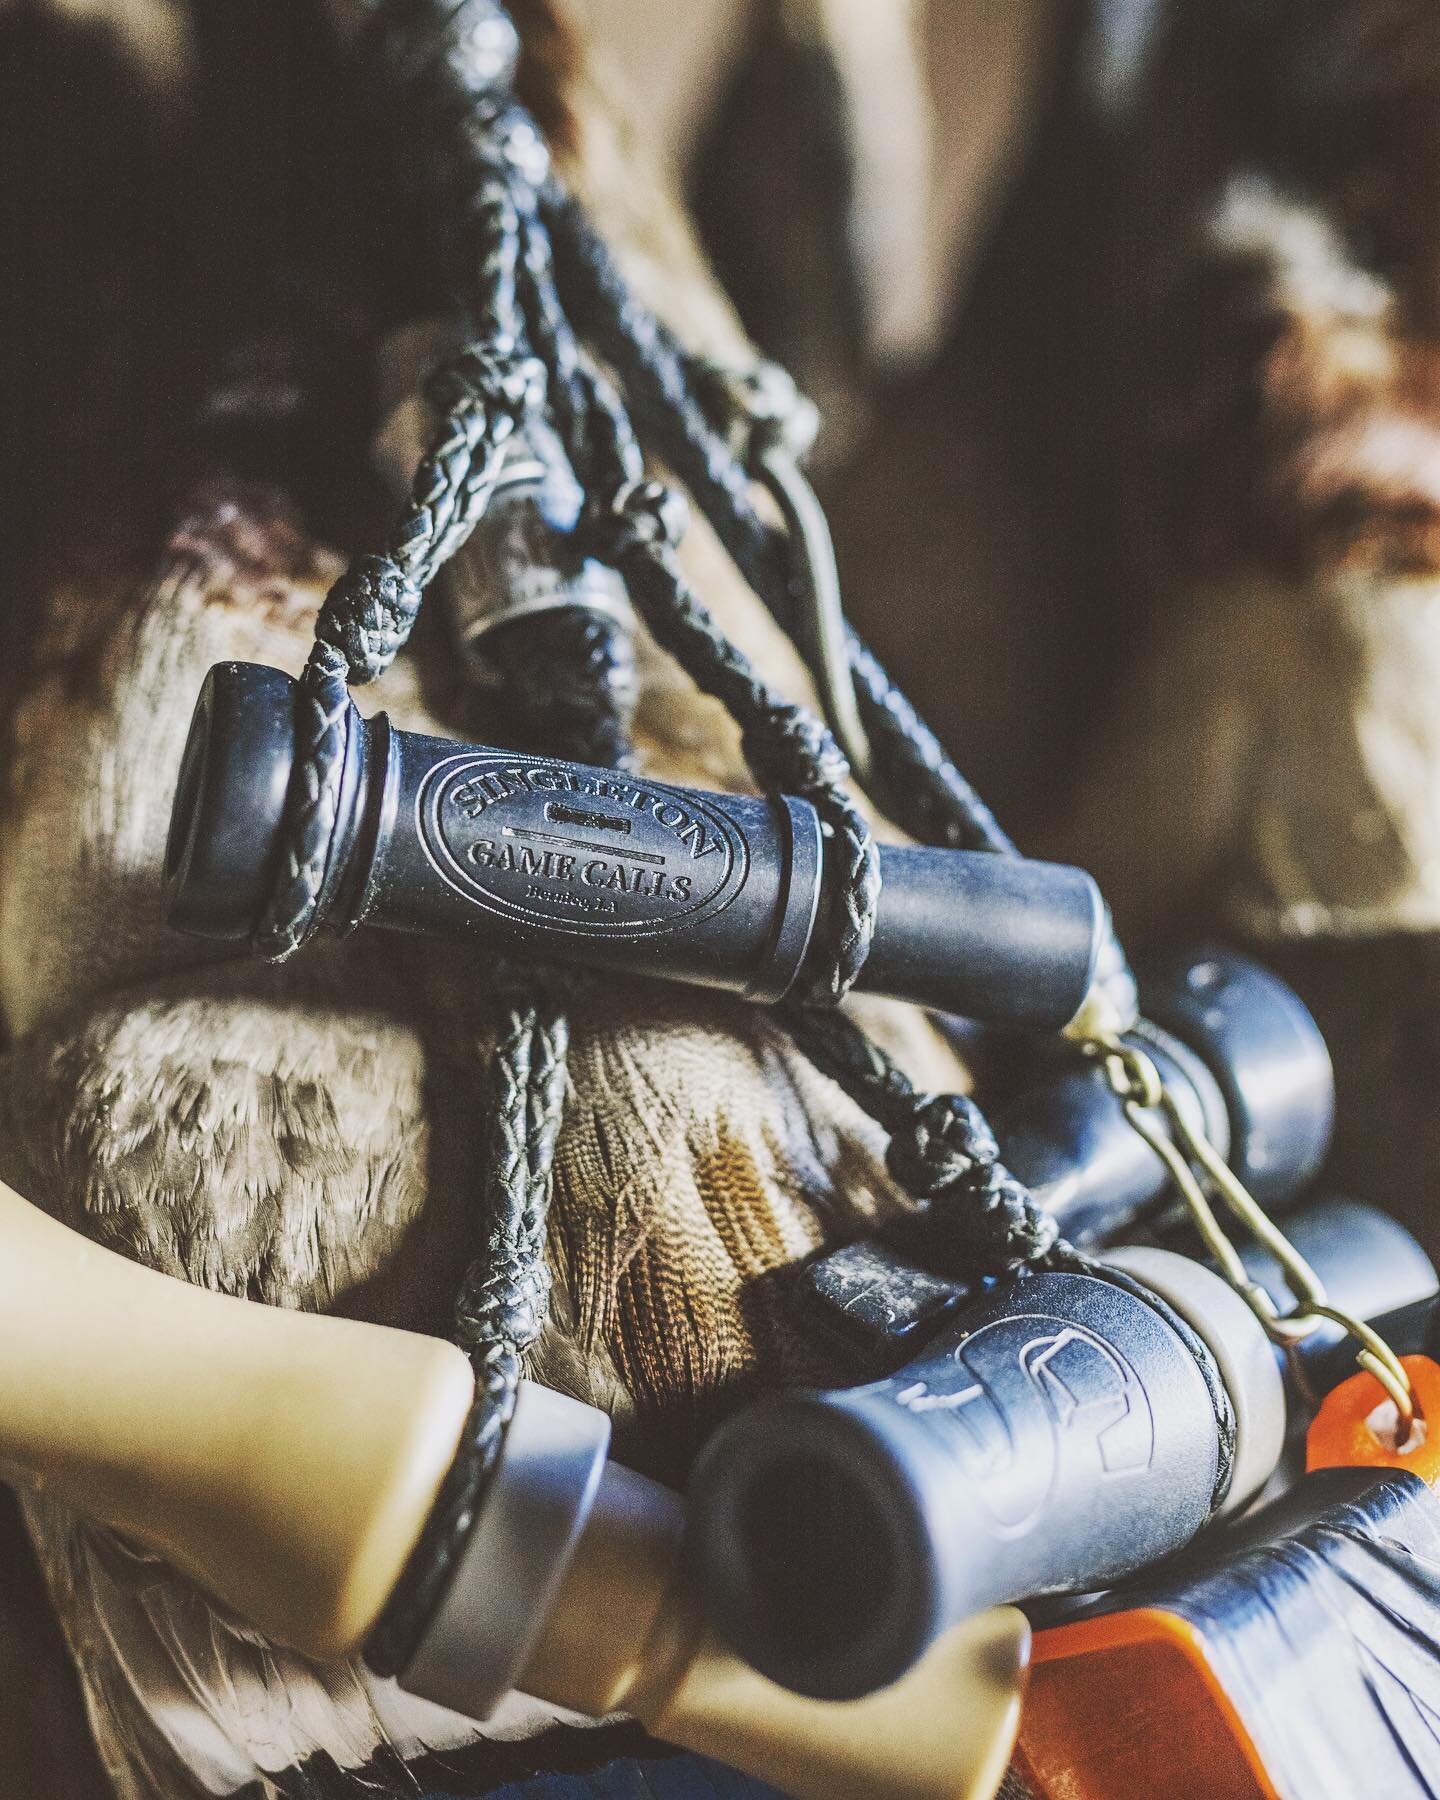 To much of a good thing? I don&rsquo;t think it&rsquo;s possible. 

#dontasknicely #singletongamecalls #cutdown #ducks #duckcalls #theduke #theoperator #lacut #originalcutdown #duckhunting #duckdogs #duckboat #duckcallmaker #duckseason #bandedbrands 